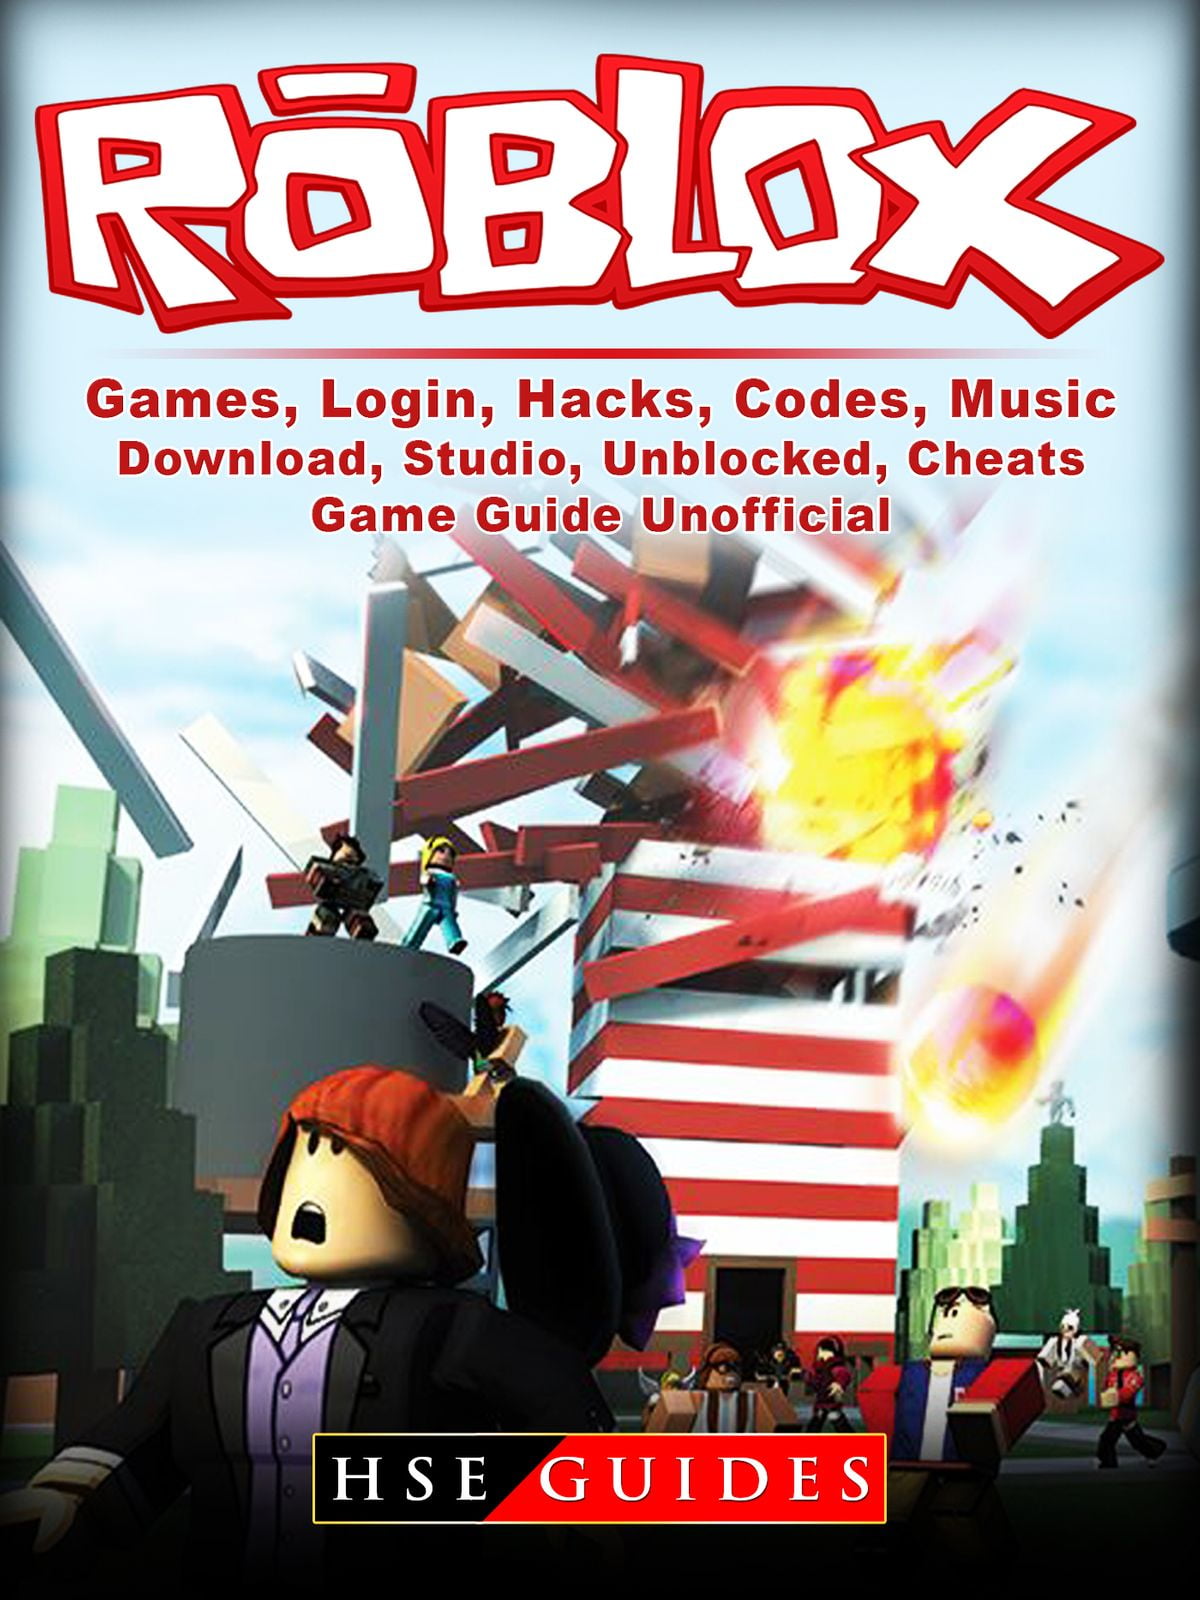 Roblox Music Codes Outside Today